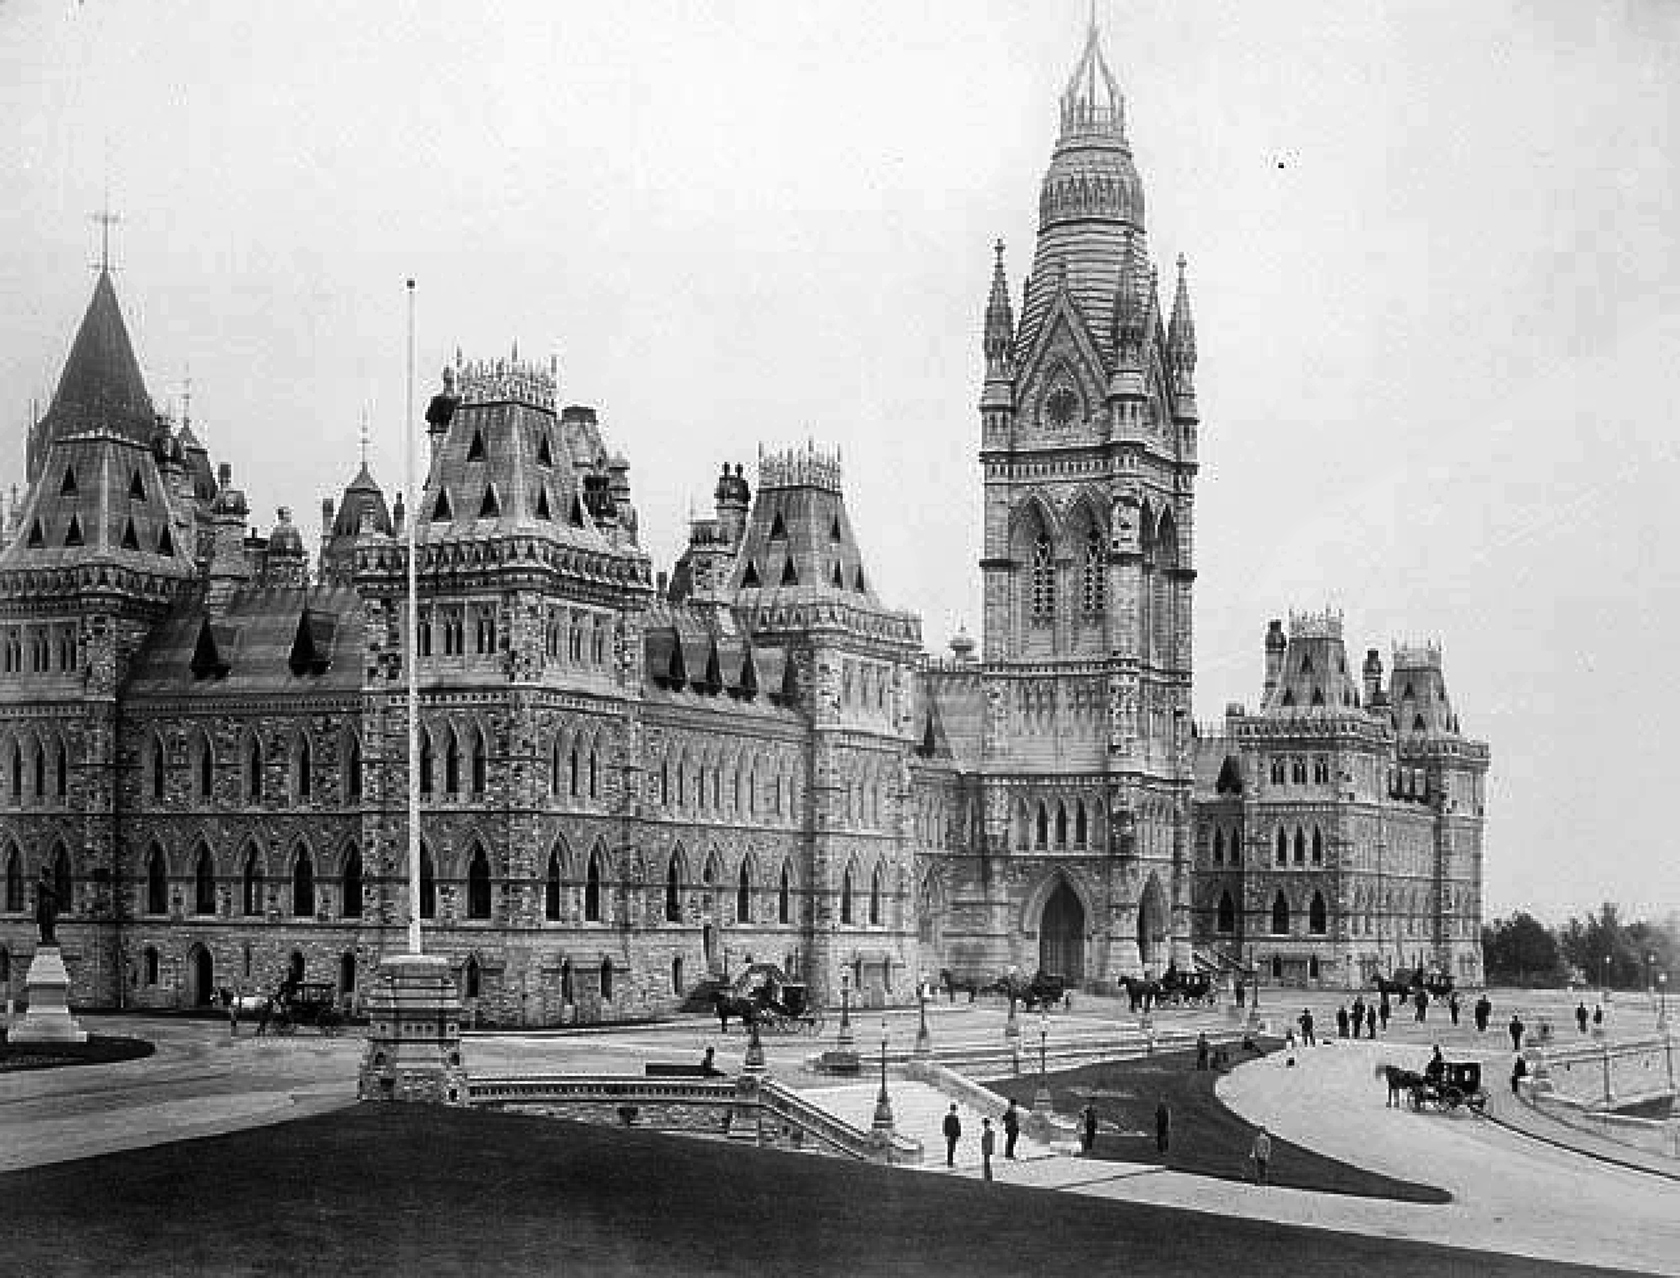 Parliament Hill’s original Centre Block, with its Victoria Tower, in 1880. (Photo credit: Library and Archives Canada)